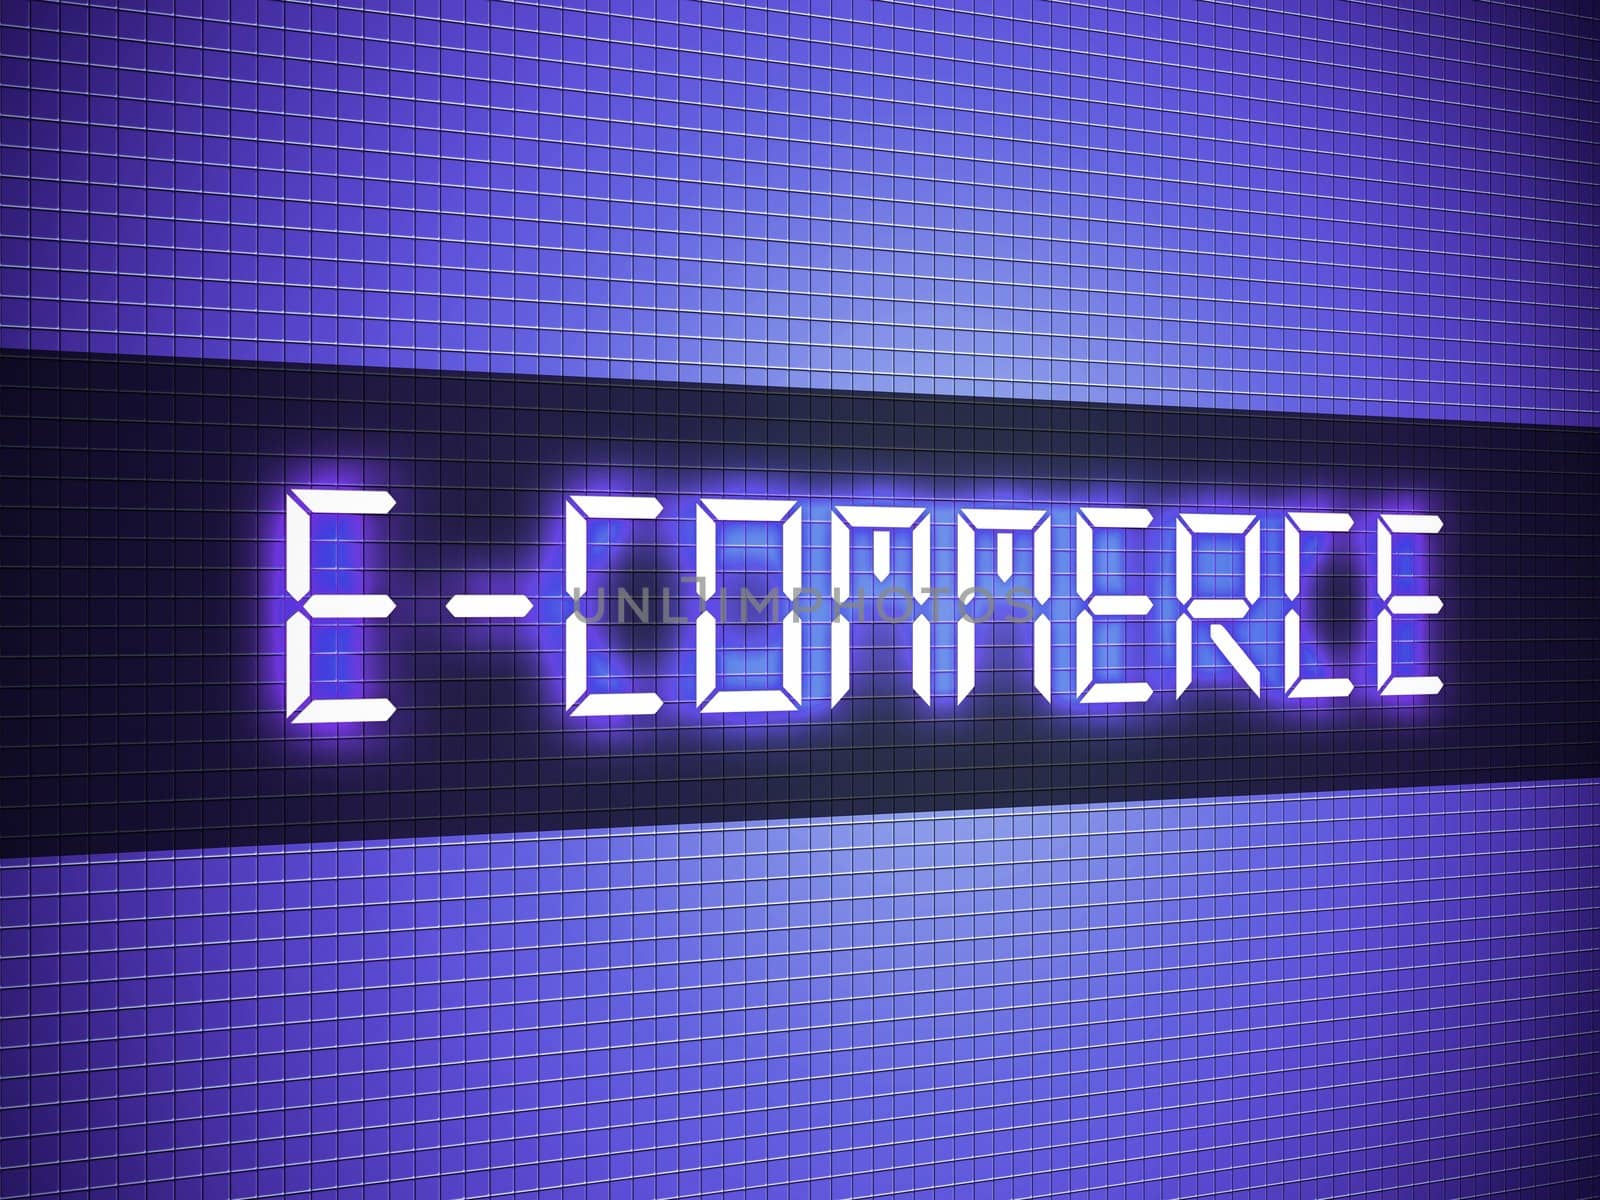 Digital e-commerce word on lcd-styled display by simpson33